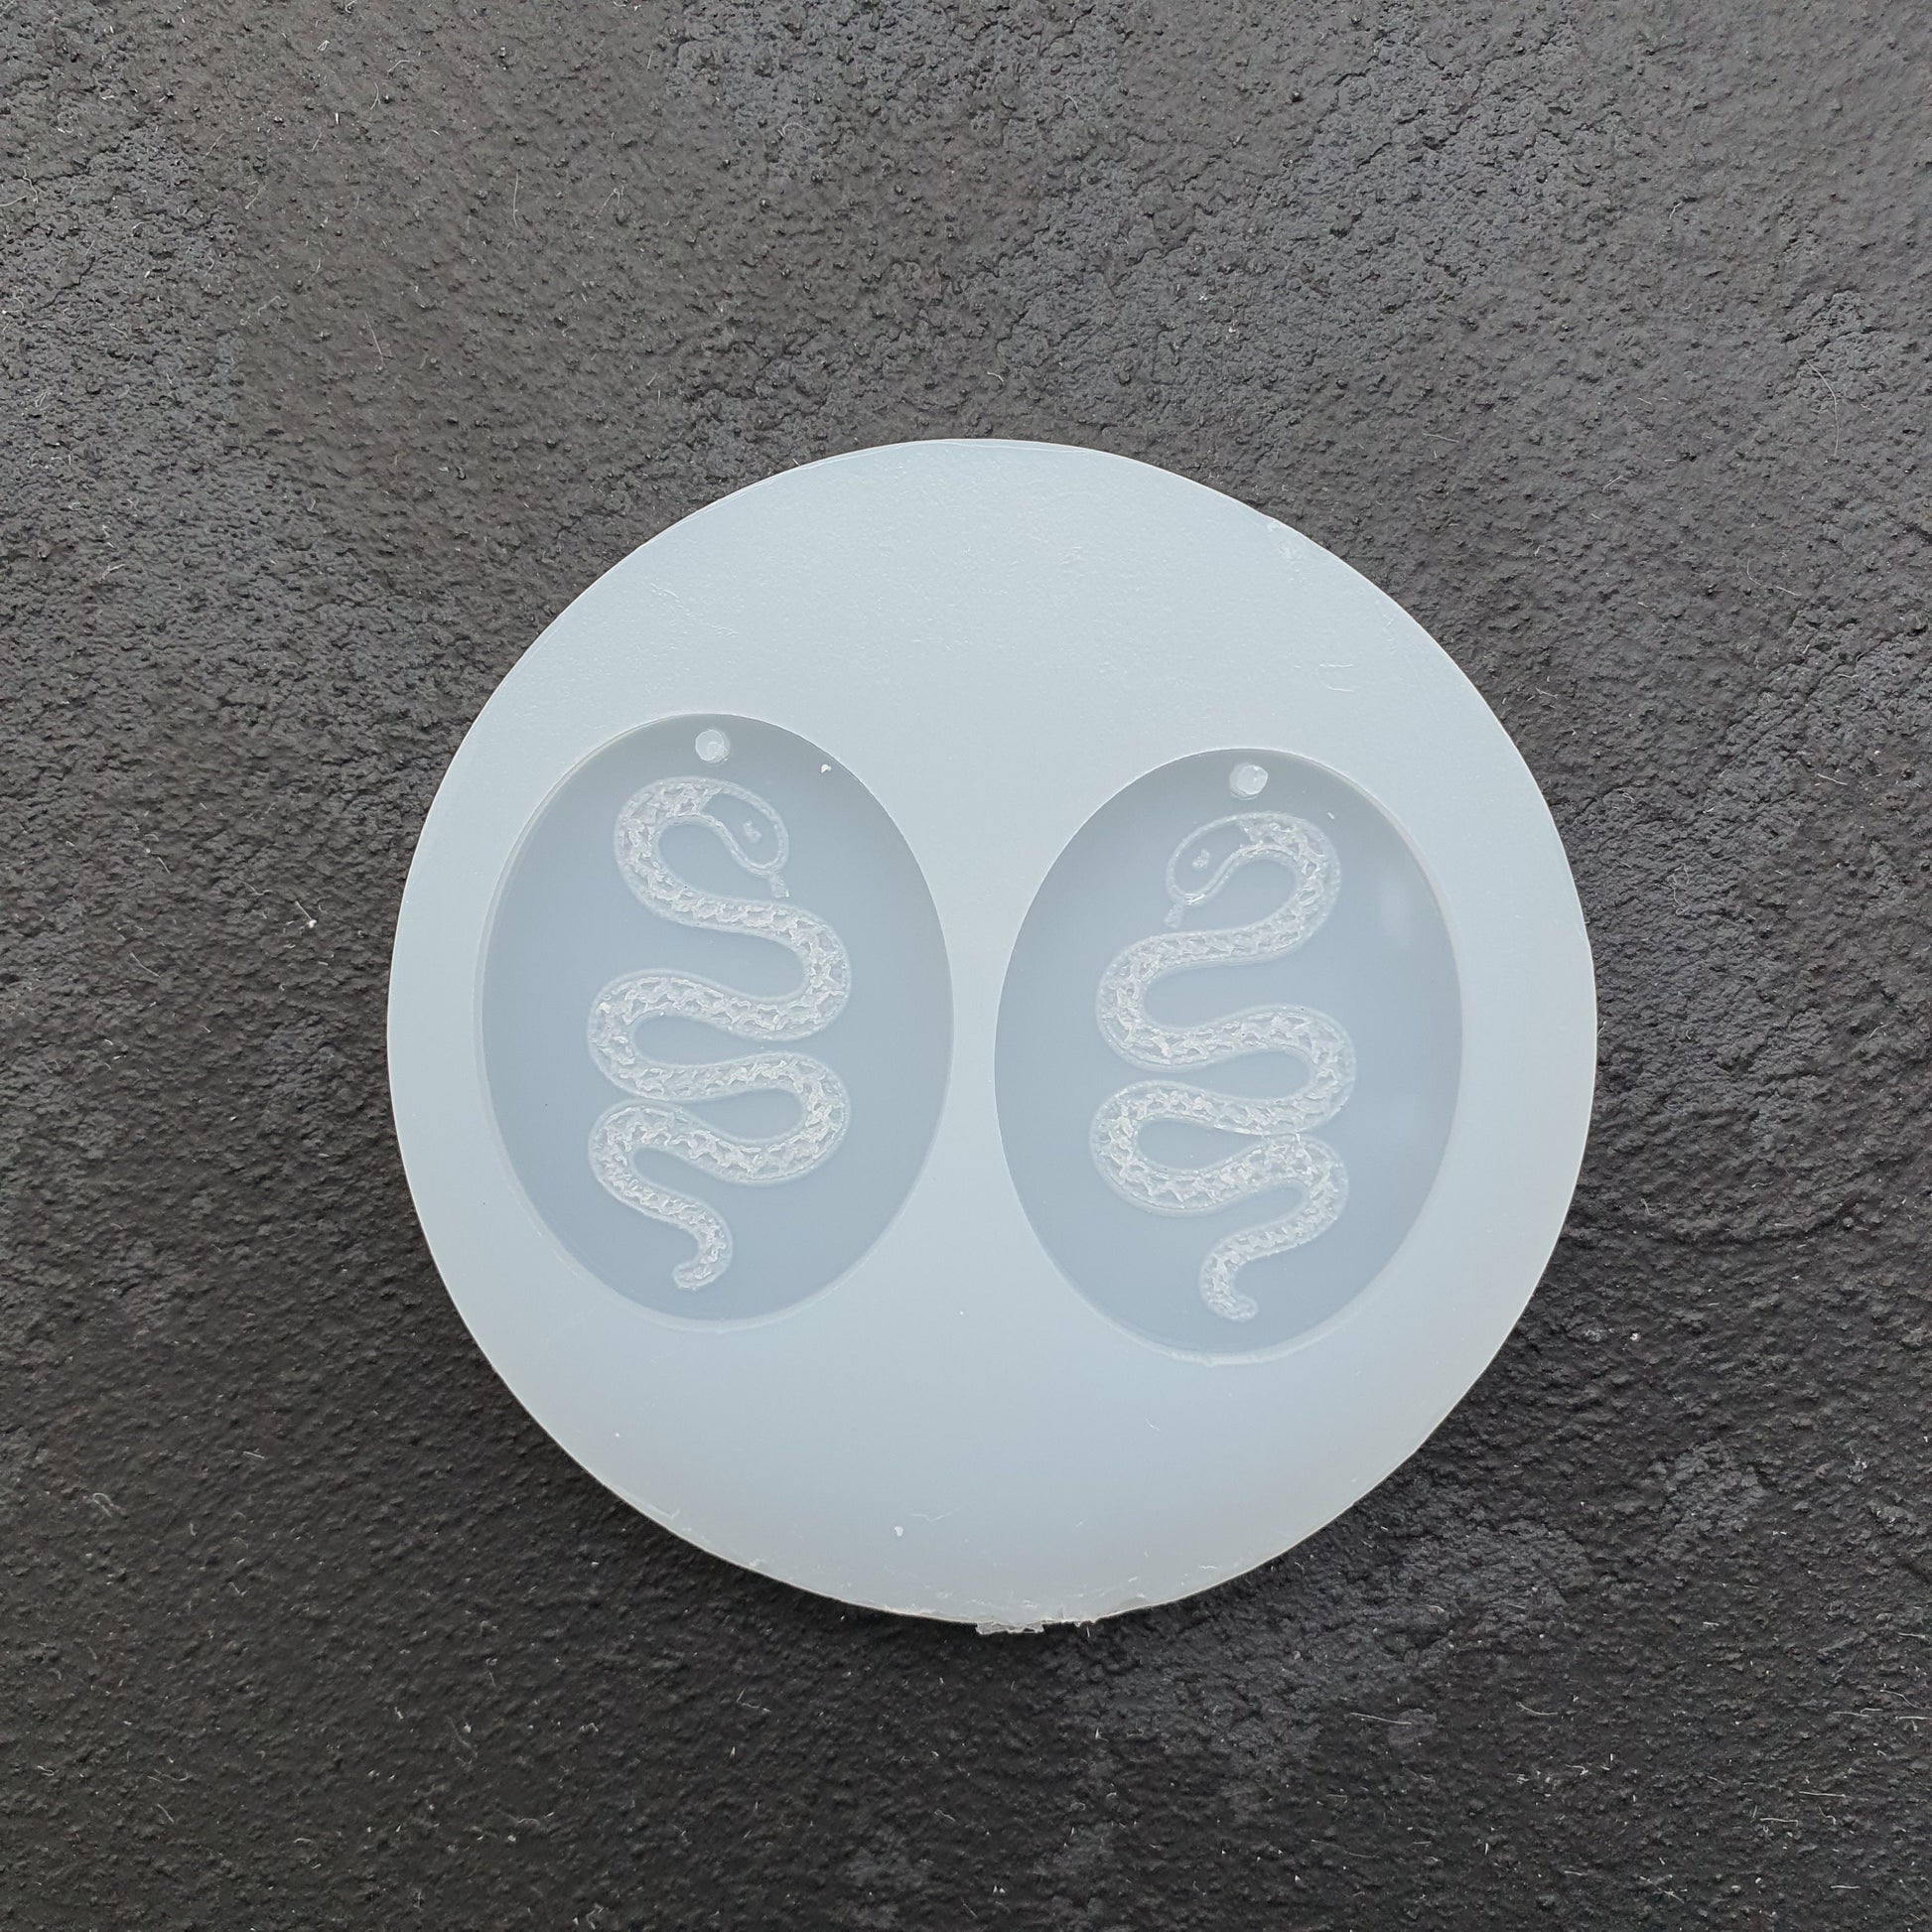 Silicone earrings mold "Snake" mould for resin and epoxy - Luxy Kraft